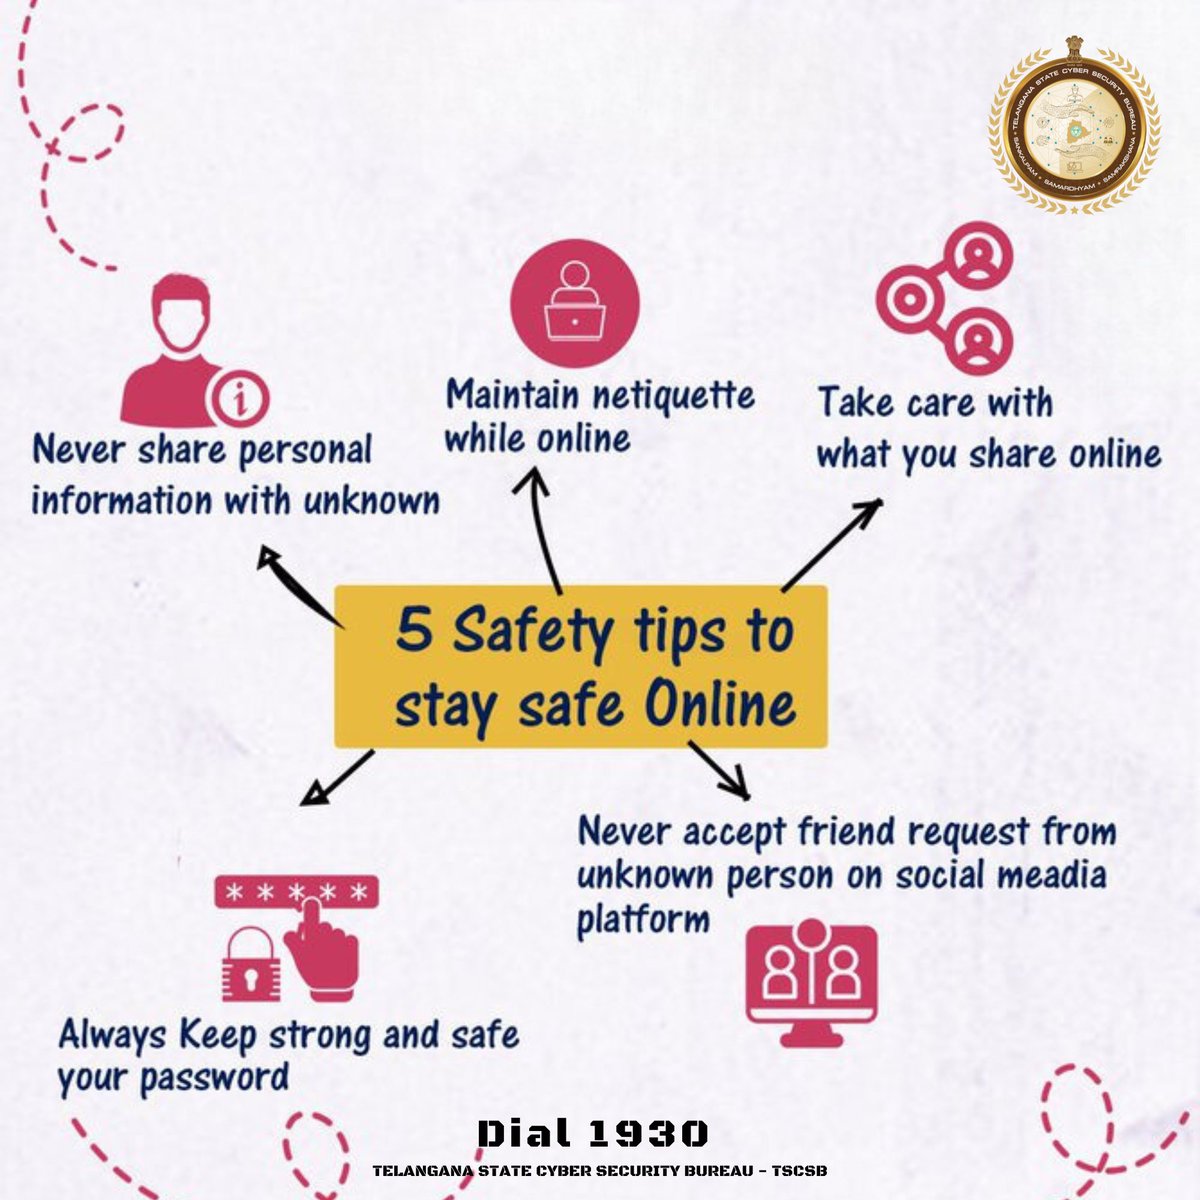 Follow these Cyber Safety Tips to stay safe online and Be Cybersafe.

If you are a victim of cybercrime, dial 1930 and register your complaint at cybercrime.gov.in

#cybersecurity #cybercrime #Fraud #cyber #security #cybersafe #cybersecurityawareness #cybersmart #TSCSB.